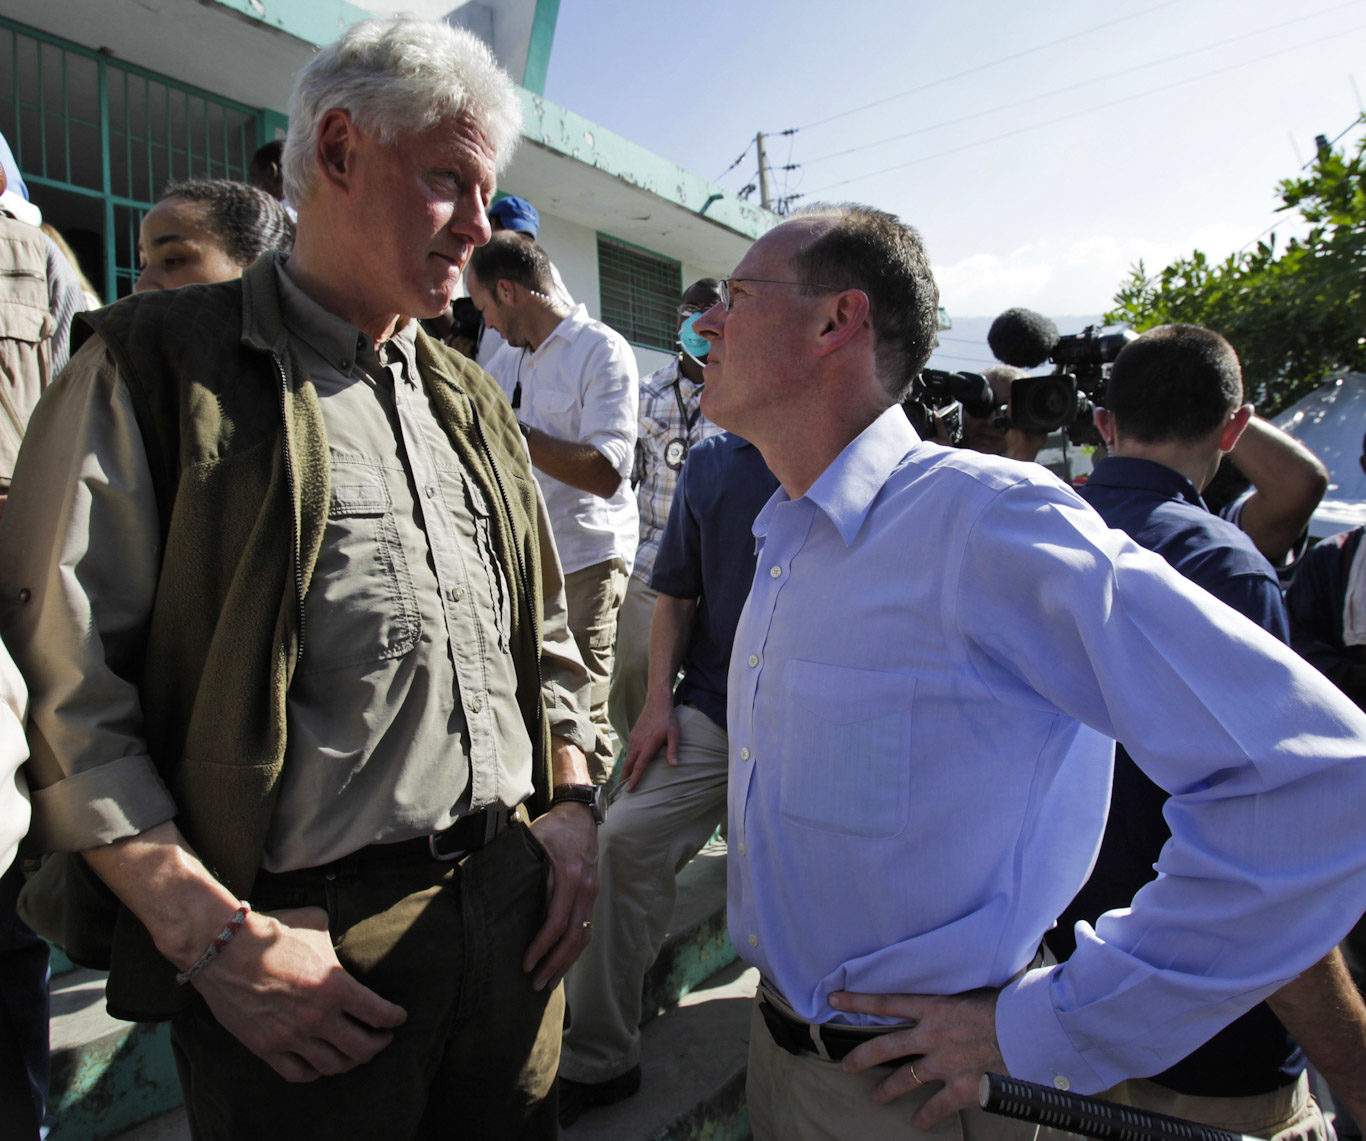 Bill Clinton, left, talks to Dr. Paul Farmer while touring the General Hospital in Port-au-Prince, Jan. 18, 2010.